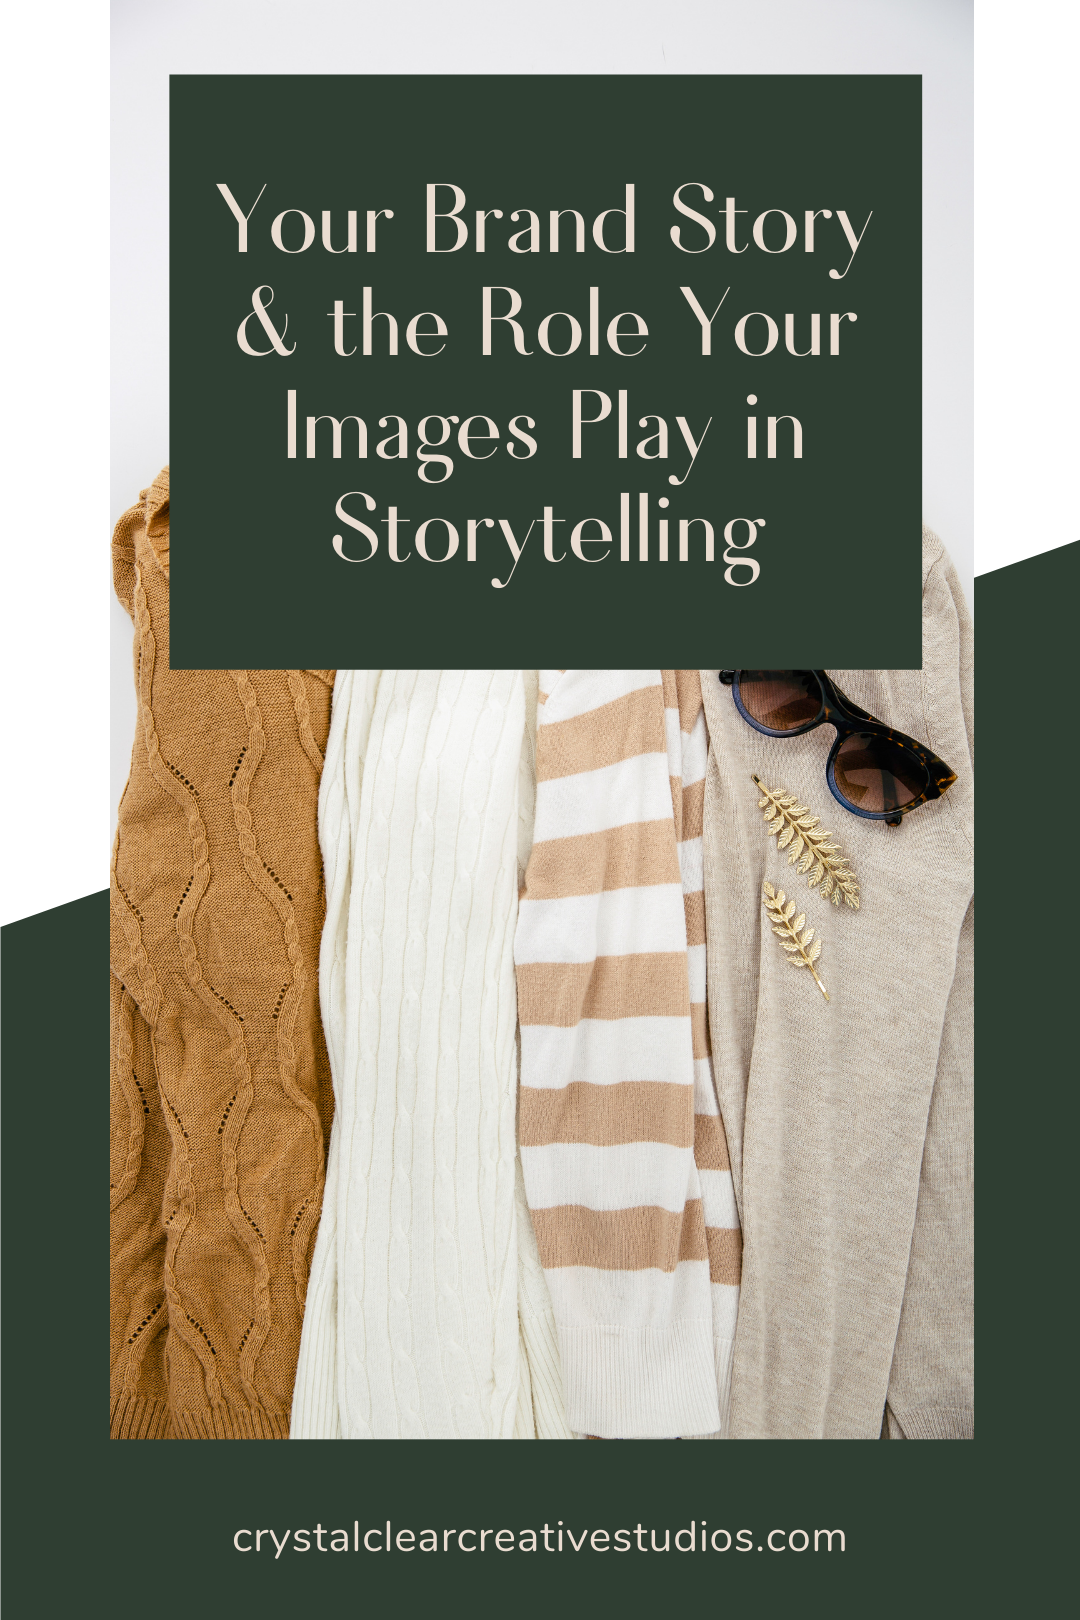 Your Brand Story and the Role Images Play in Storytelling